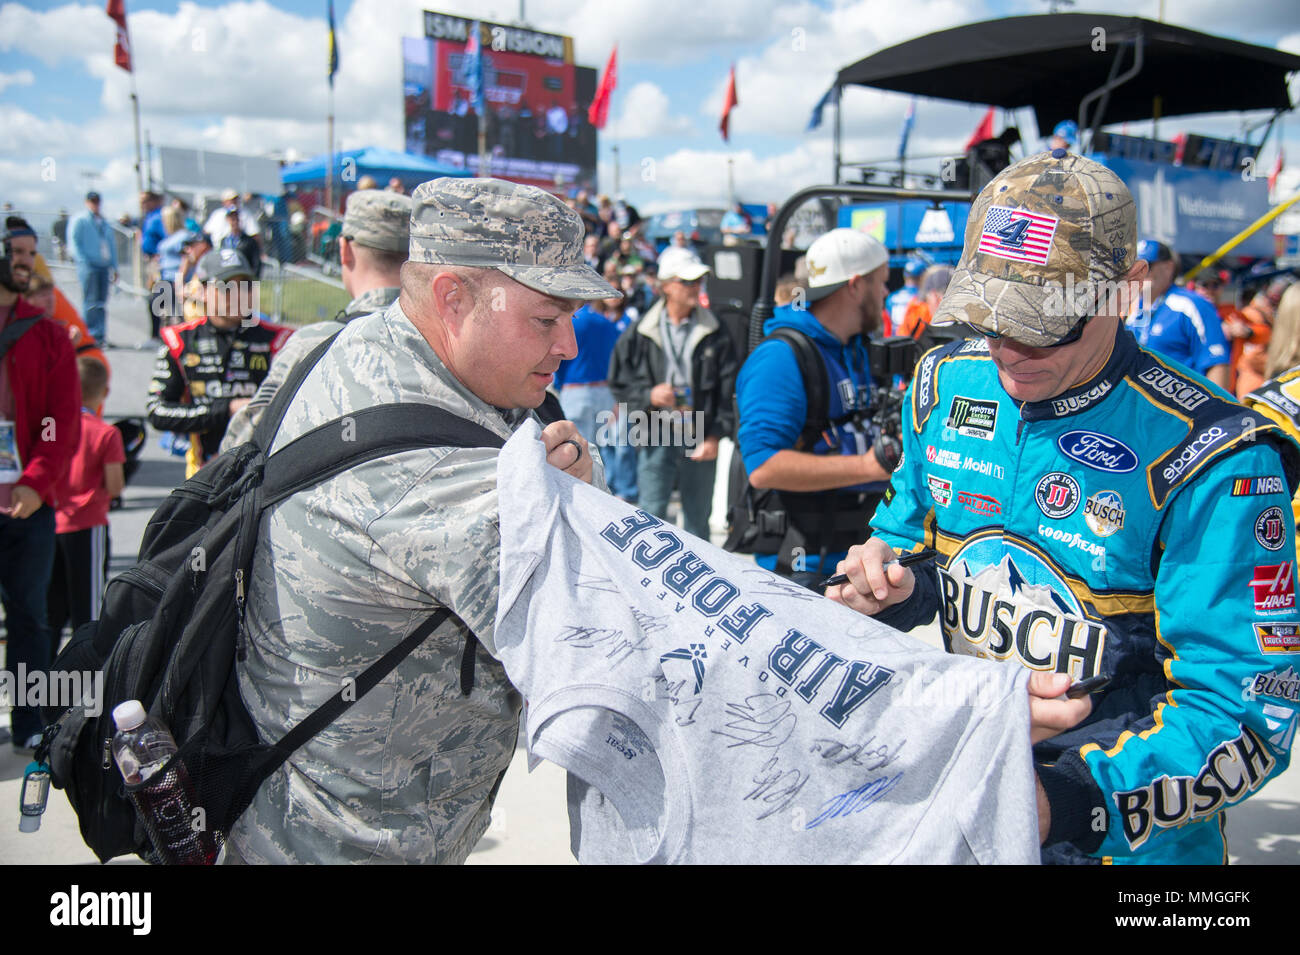 Kevin Harvick, driver of the No. 4 Ford Fusion, autographs a t-shirt for Tech. Sgt. Steven Auer, 436th Operations Support Squadron air traffic control ops supervisor, before the Apache Warrior 400 race Oct. 1, 2017, at Dover International Speedway, Dover, Del. Auer was a participant of the Troops to Tracks program, which treats service members, veterans and military families to special VIP access at NASCAR races. (U.S. Air Force photo by Mauricio Campino) Stock Photo